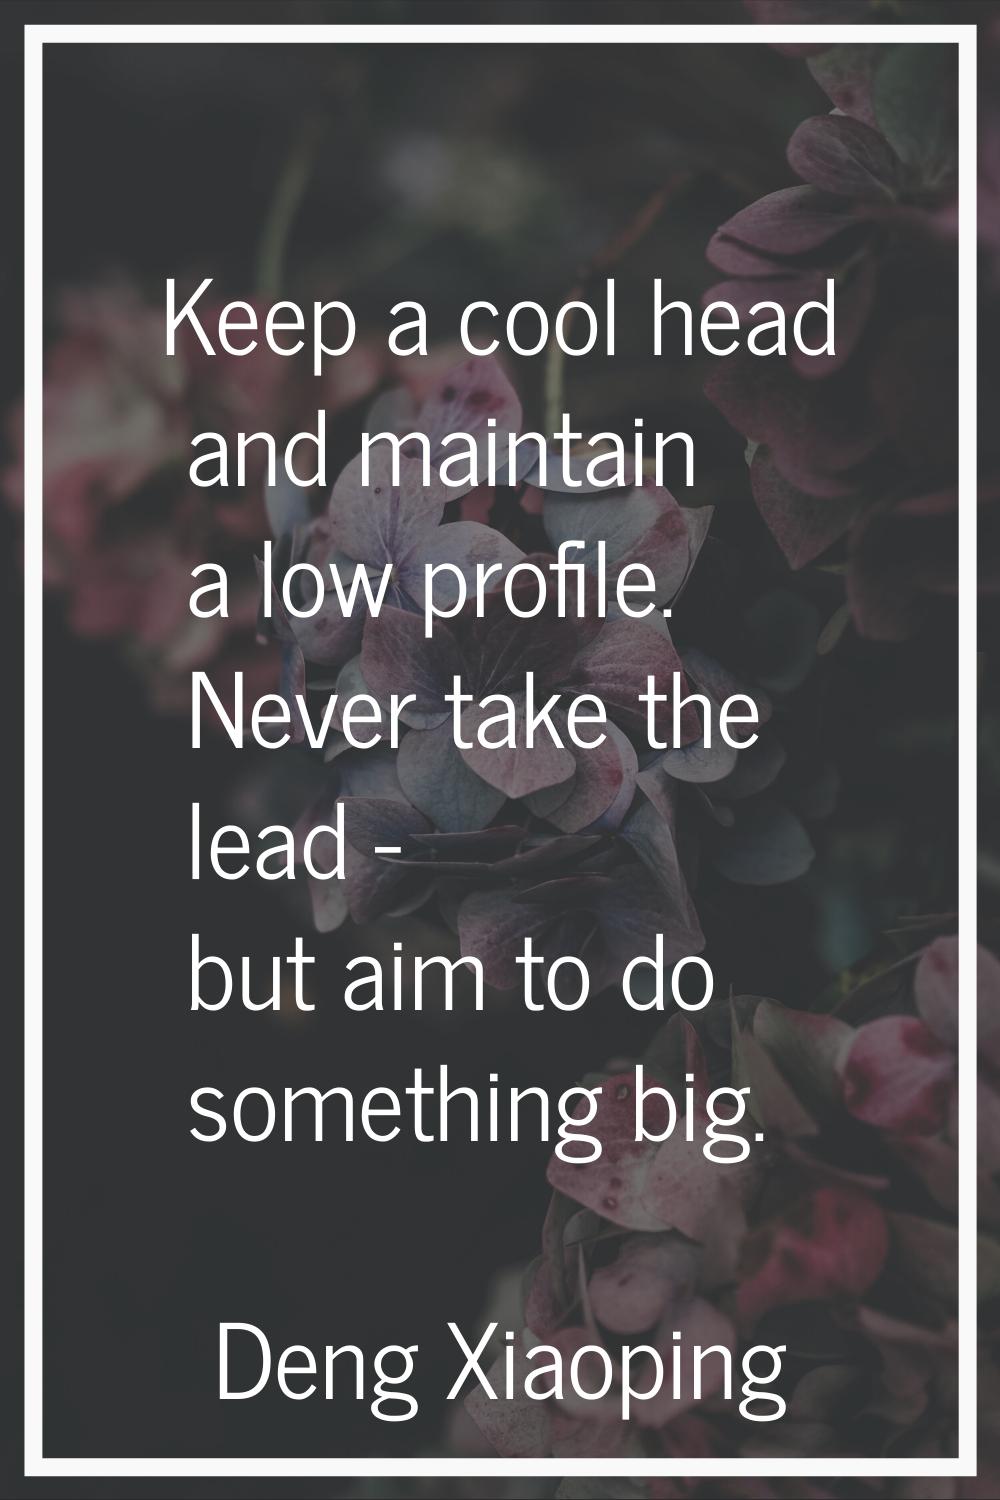 Keep a cool head and maintain a low profile. Never take the lead - but aim to do something big.